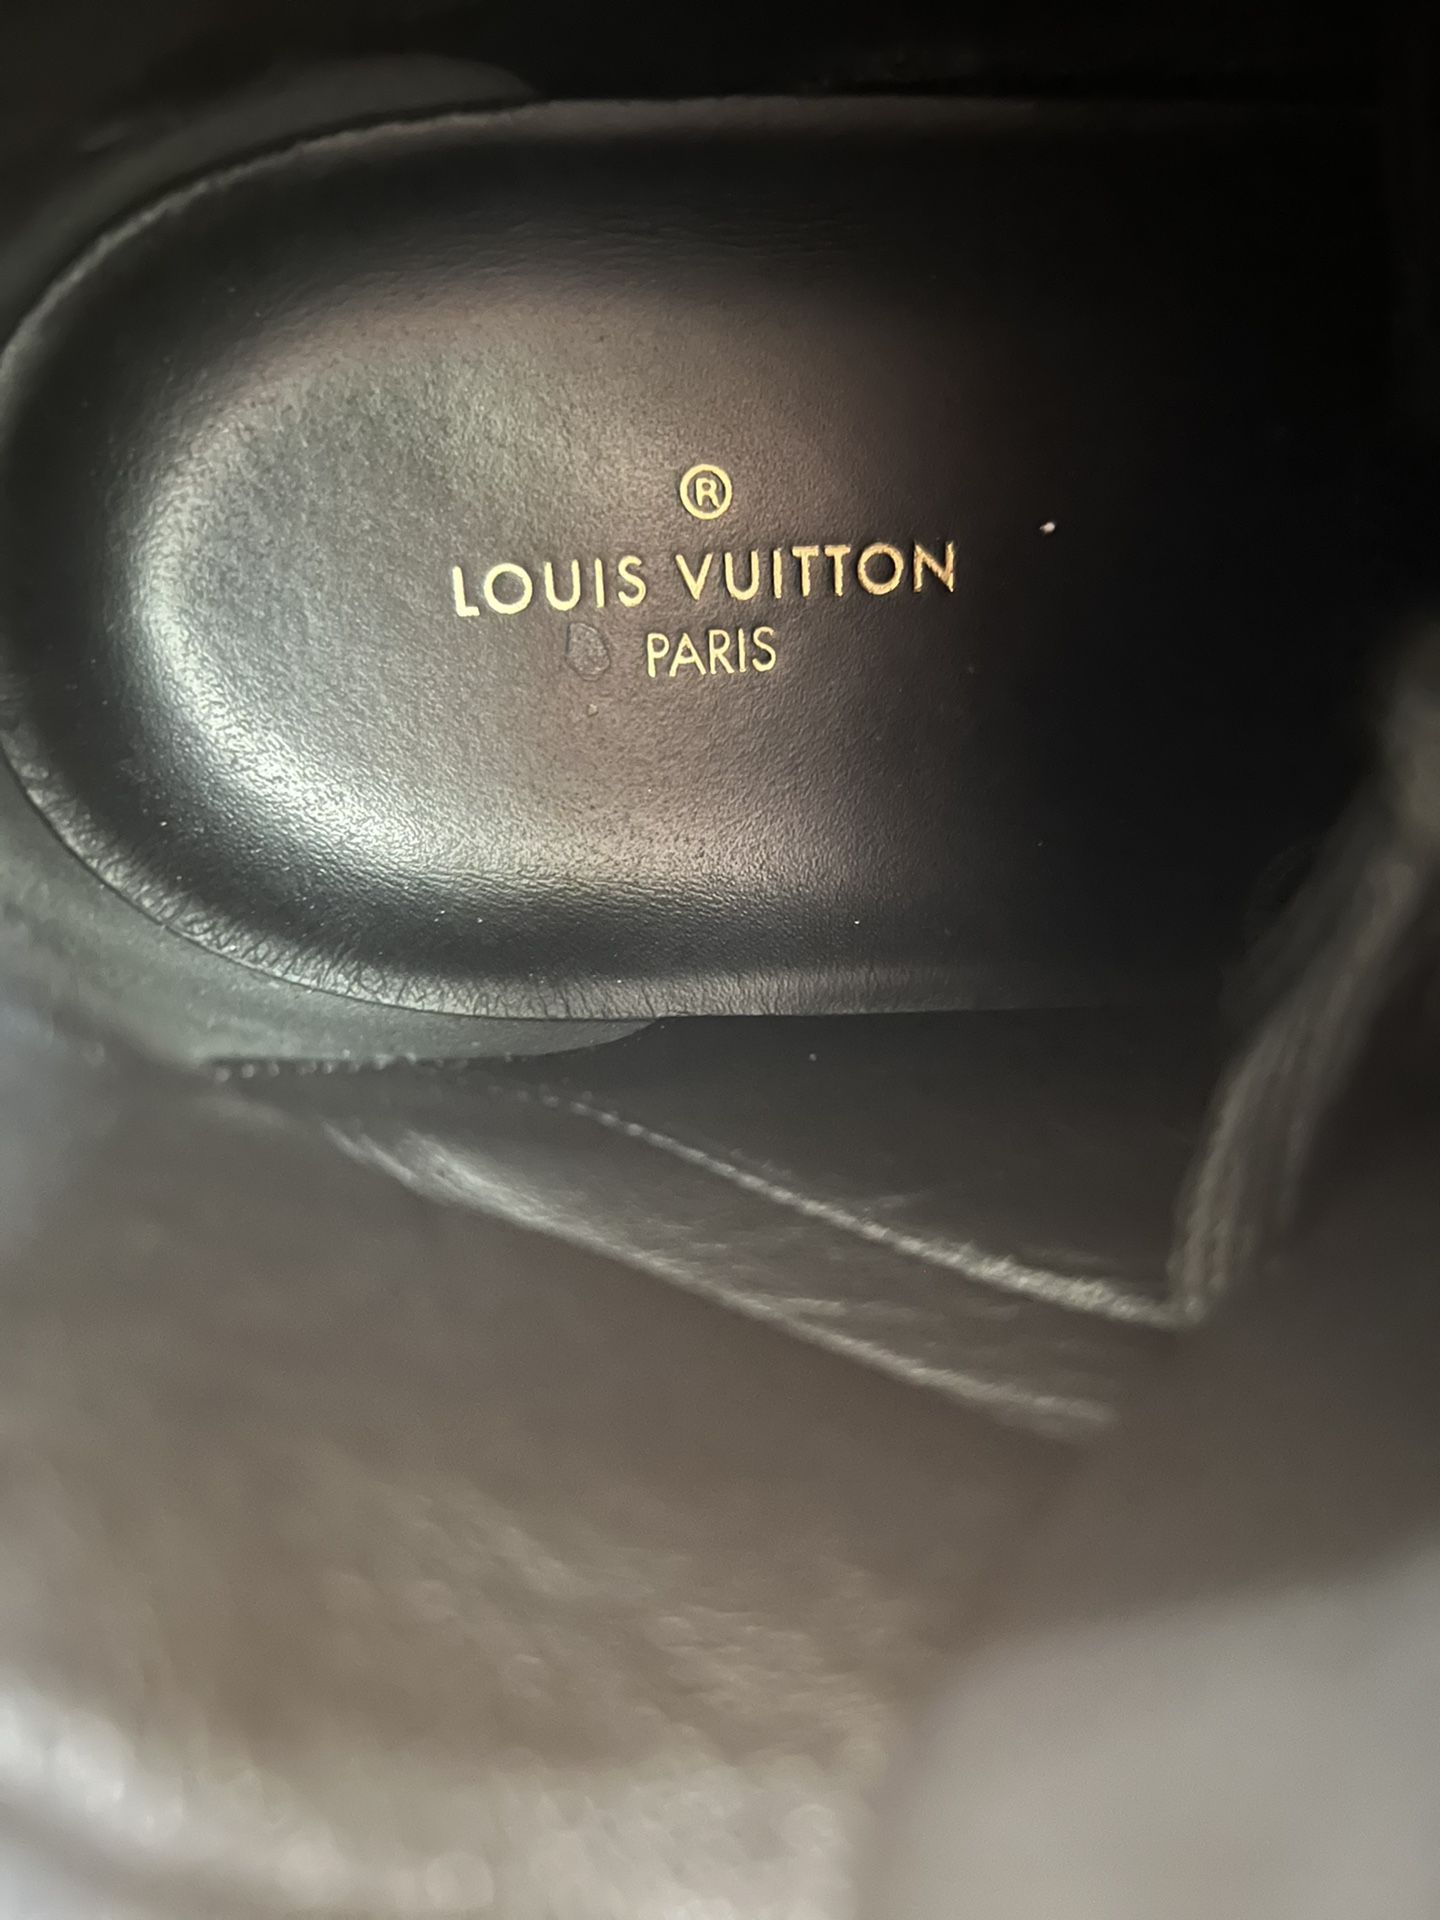 Louis Vuitton Men's Hologram Size 10 for Sale in Freeport, NY - OfferUp